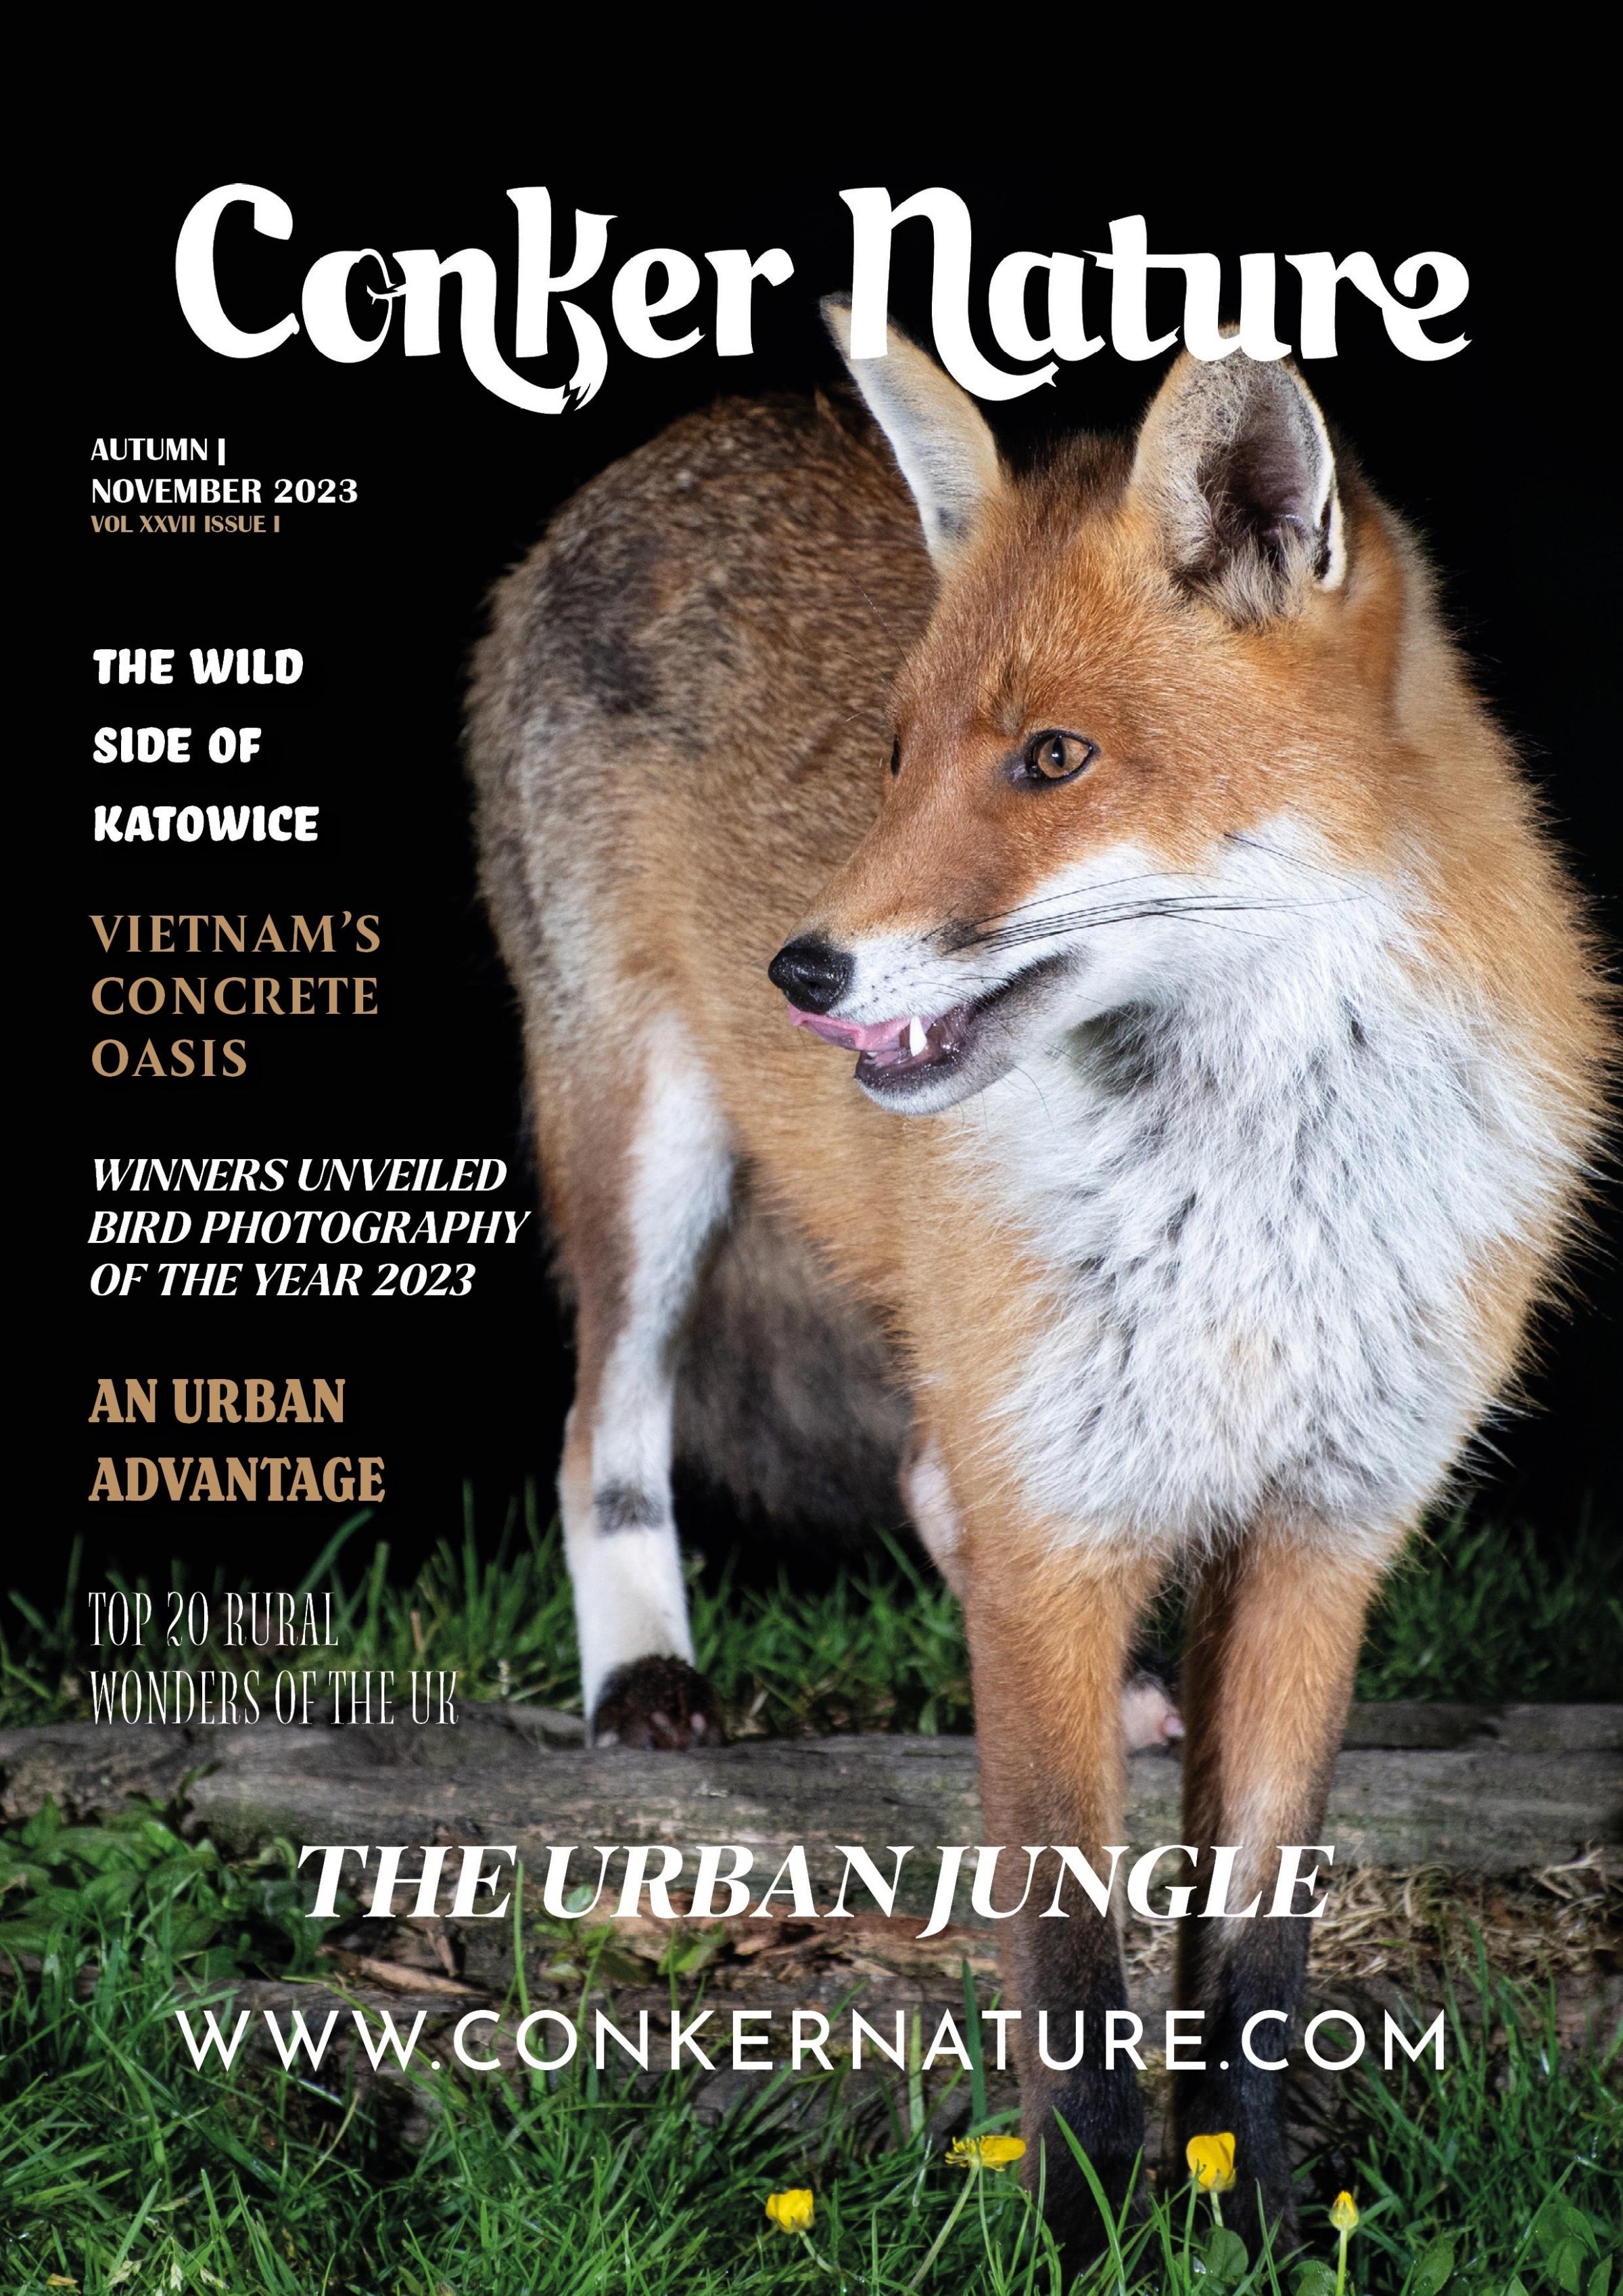 Jessica Humphreys image on the cover of Conker Nature magazine.